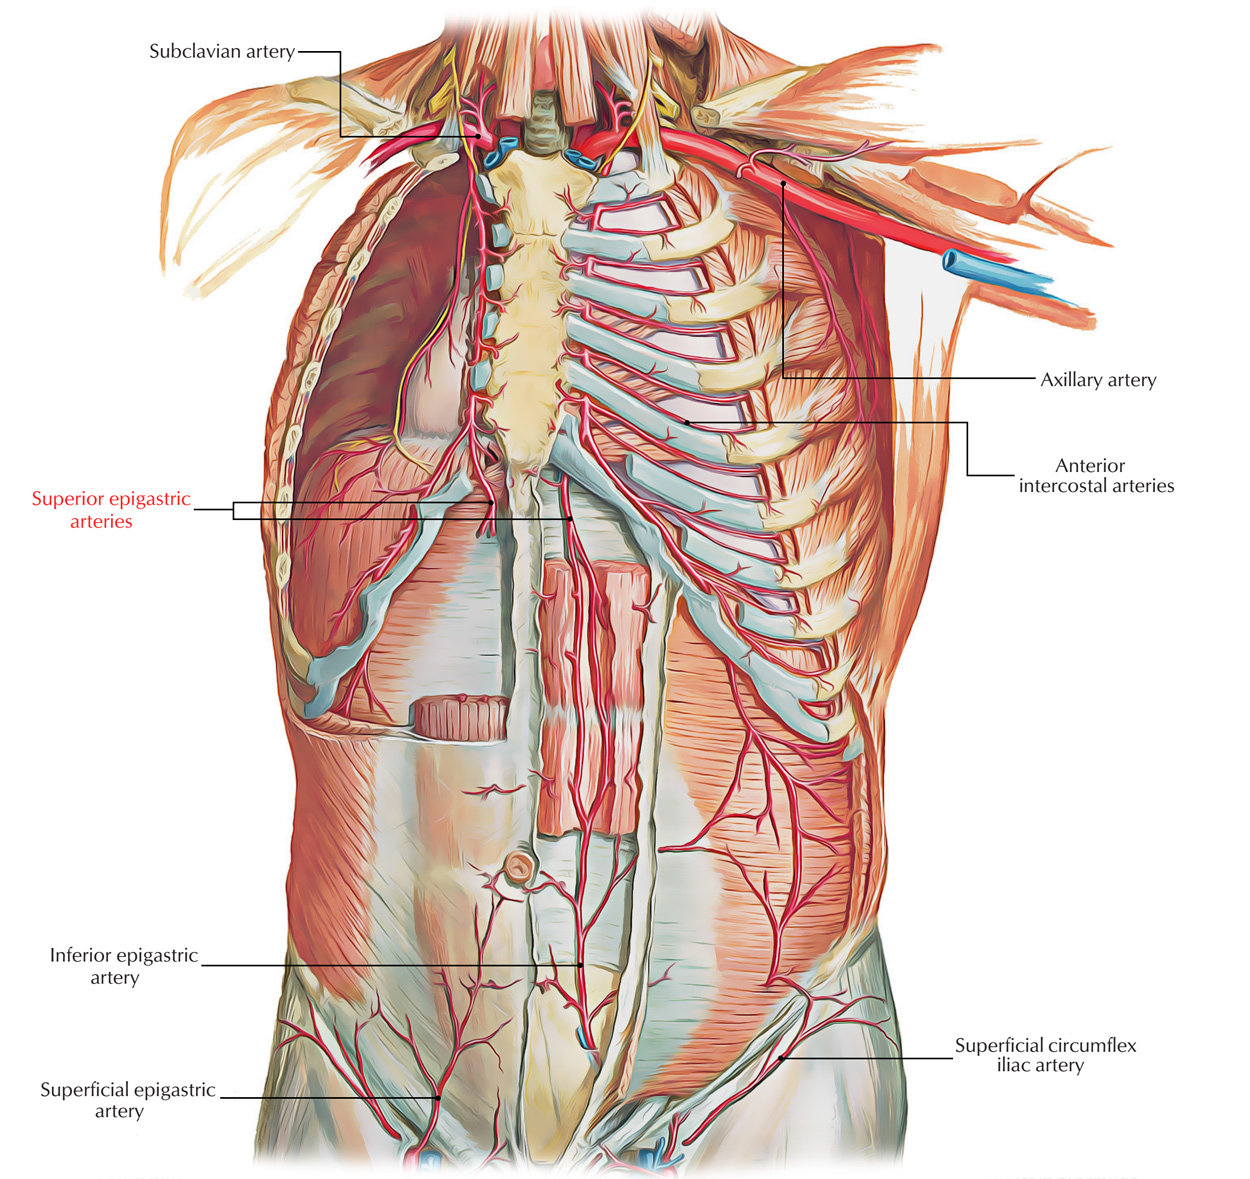 Easy Notes On 【Superior Epigastric Artery】Learn in Just 3 Minutes